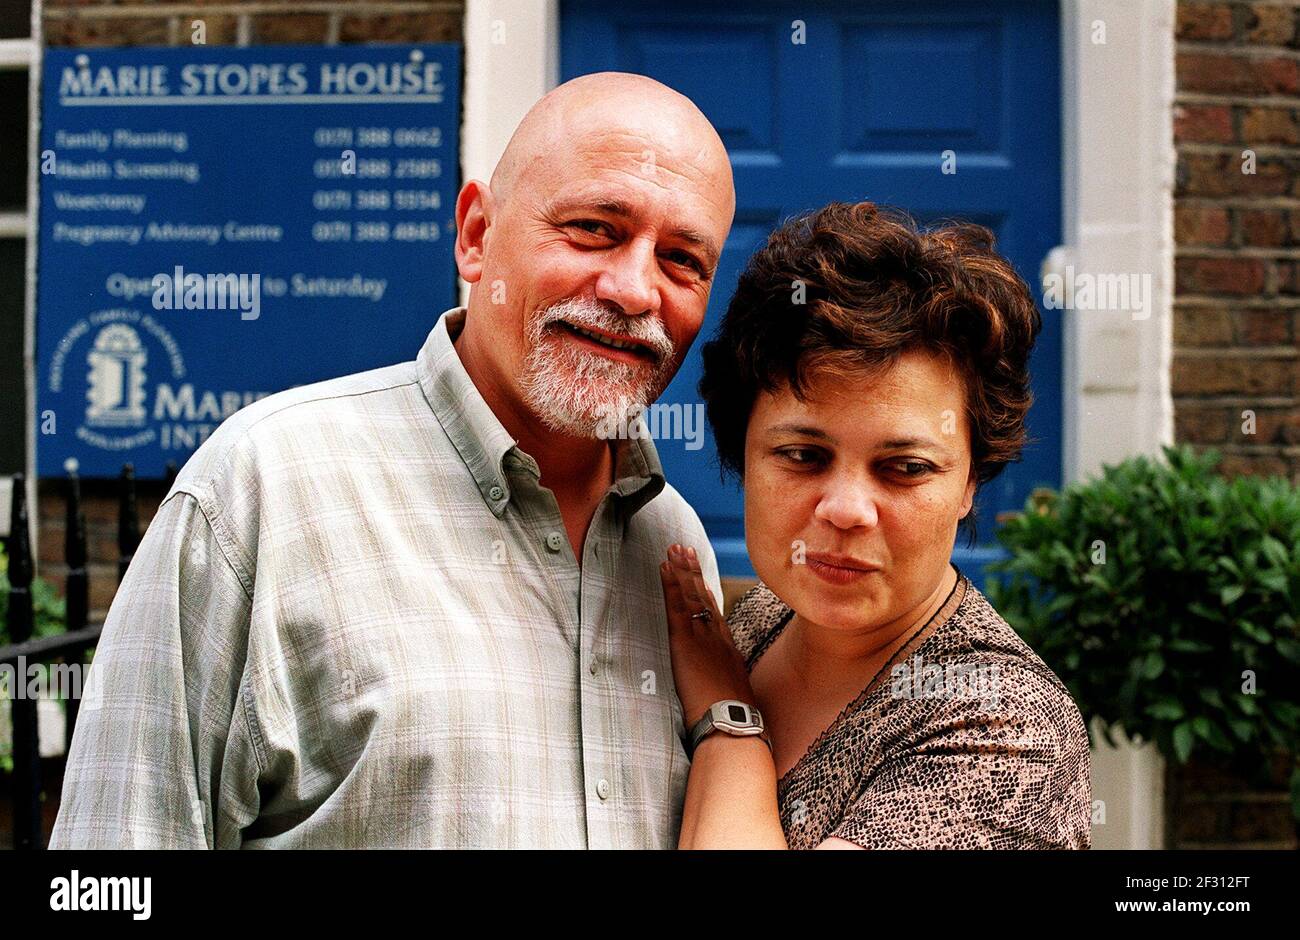 BERNARD SCHNAKENBOURG (56) FROM FRANCE WITH HIS PARTNER SANDRA RIGGS, HE IS TO RECEIVE A VASECTOMY TOMORROW AT THE MARIE STOPES HOUSE FAMILY PLANNING CLINIC IN CENTRAL LONDON. PHOTOGRAPH BY MARK CHILVERS. 13/8/00 Stock Photo